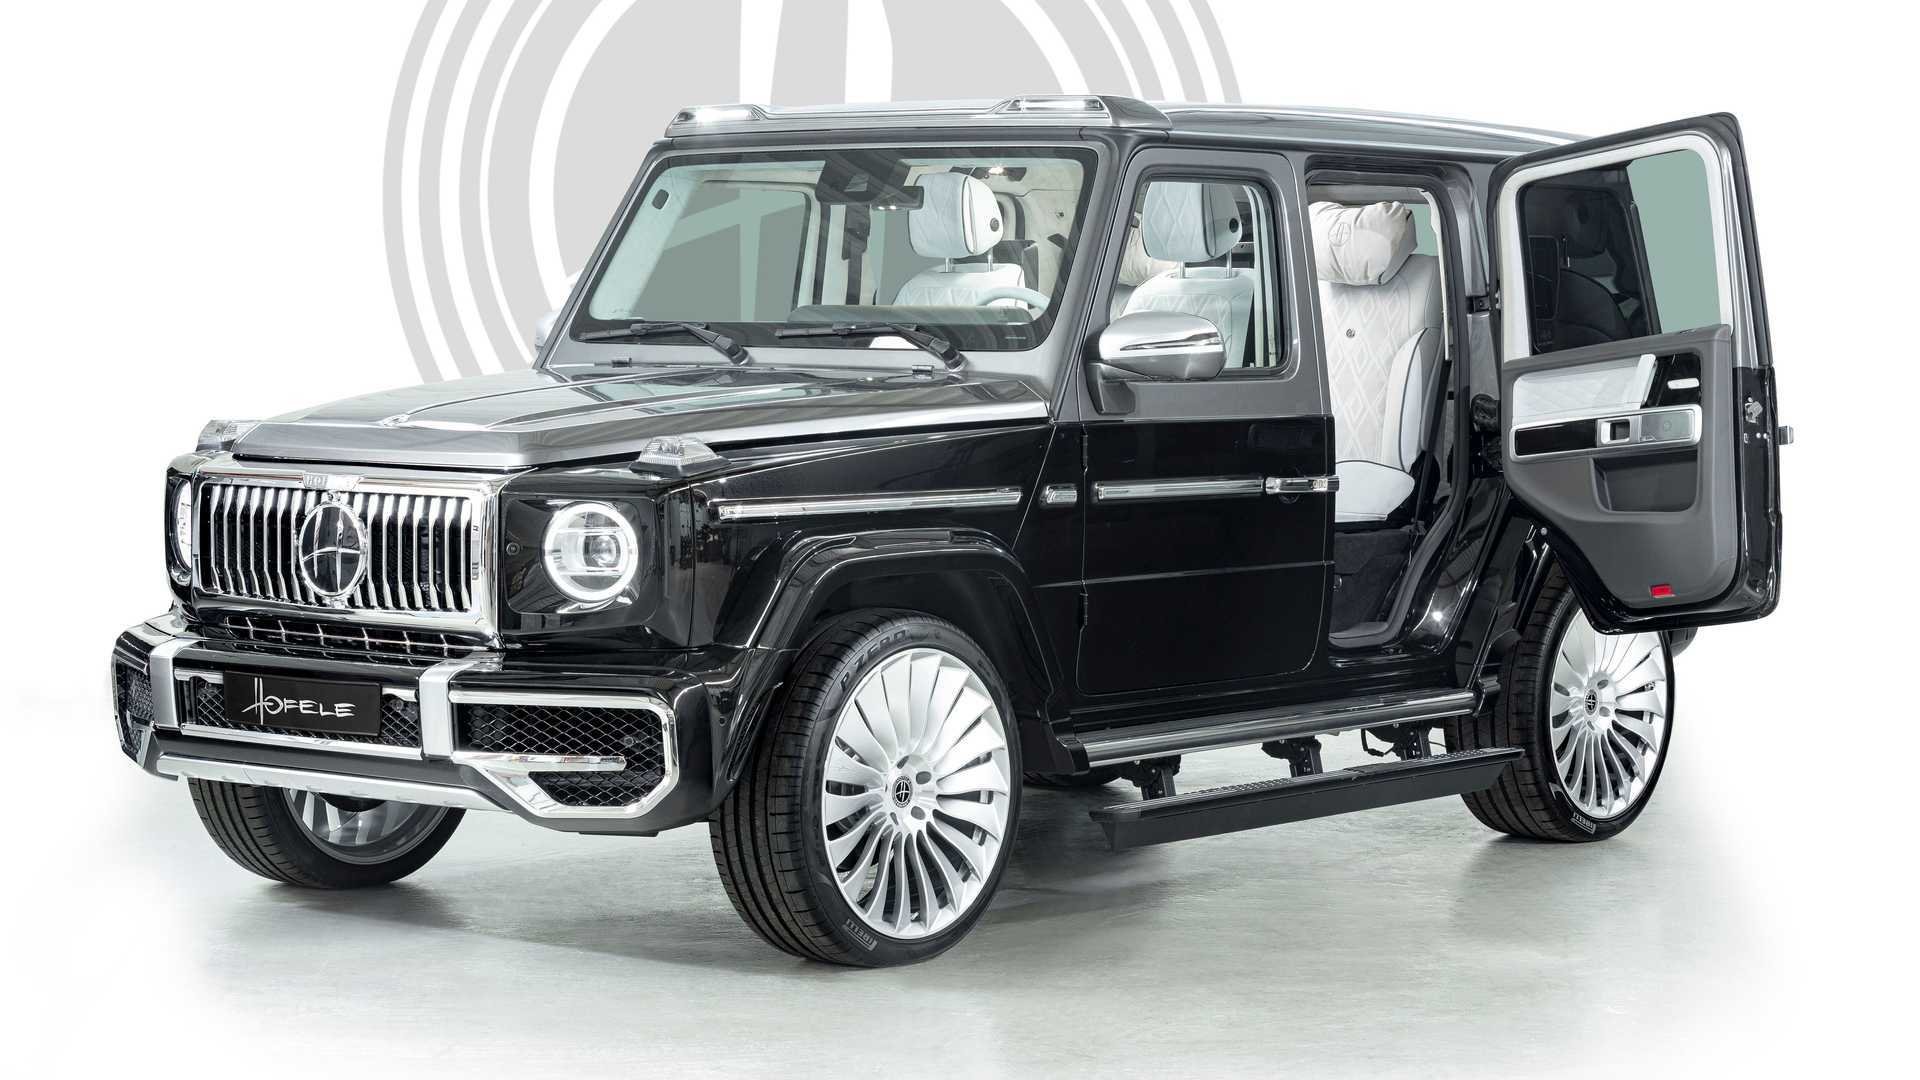 Mercedes G-Class Gets Suicide Doors From Hofele For Added Opulence